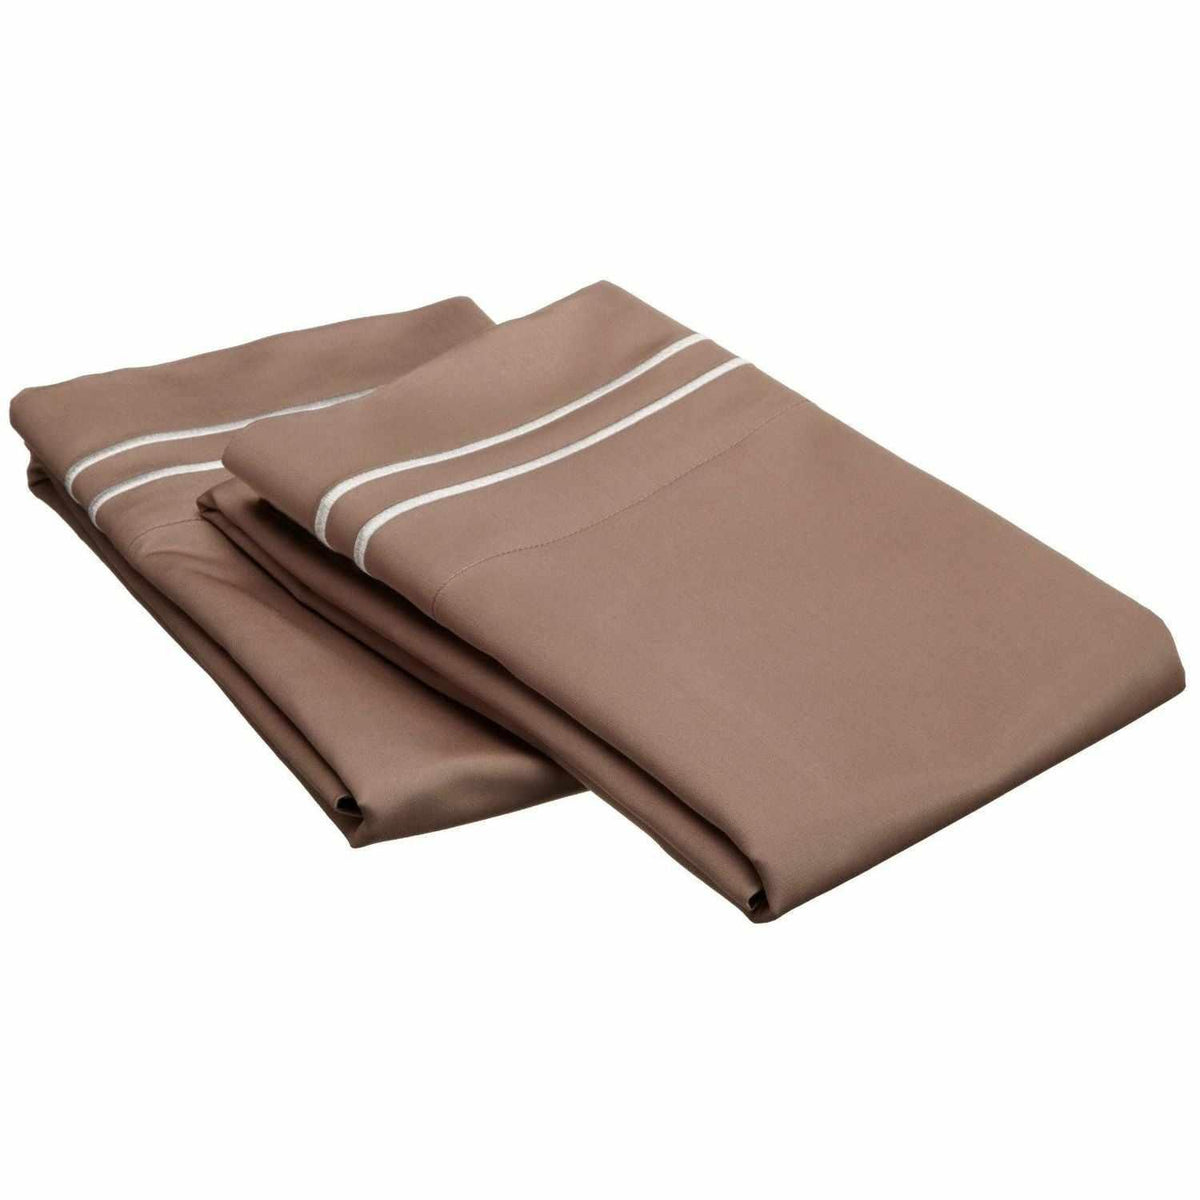 2 Embroidered Line Egyptian Cotton 2-Piece Pillowcase Set - Taupe/Ivory